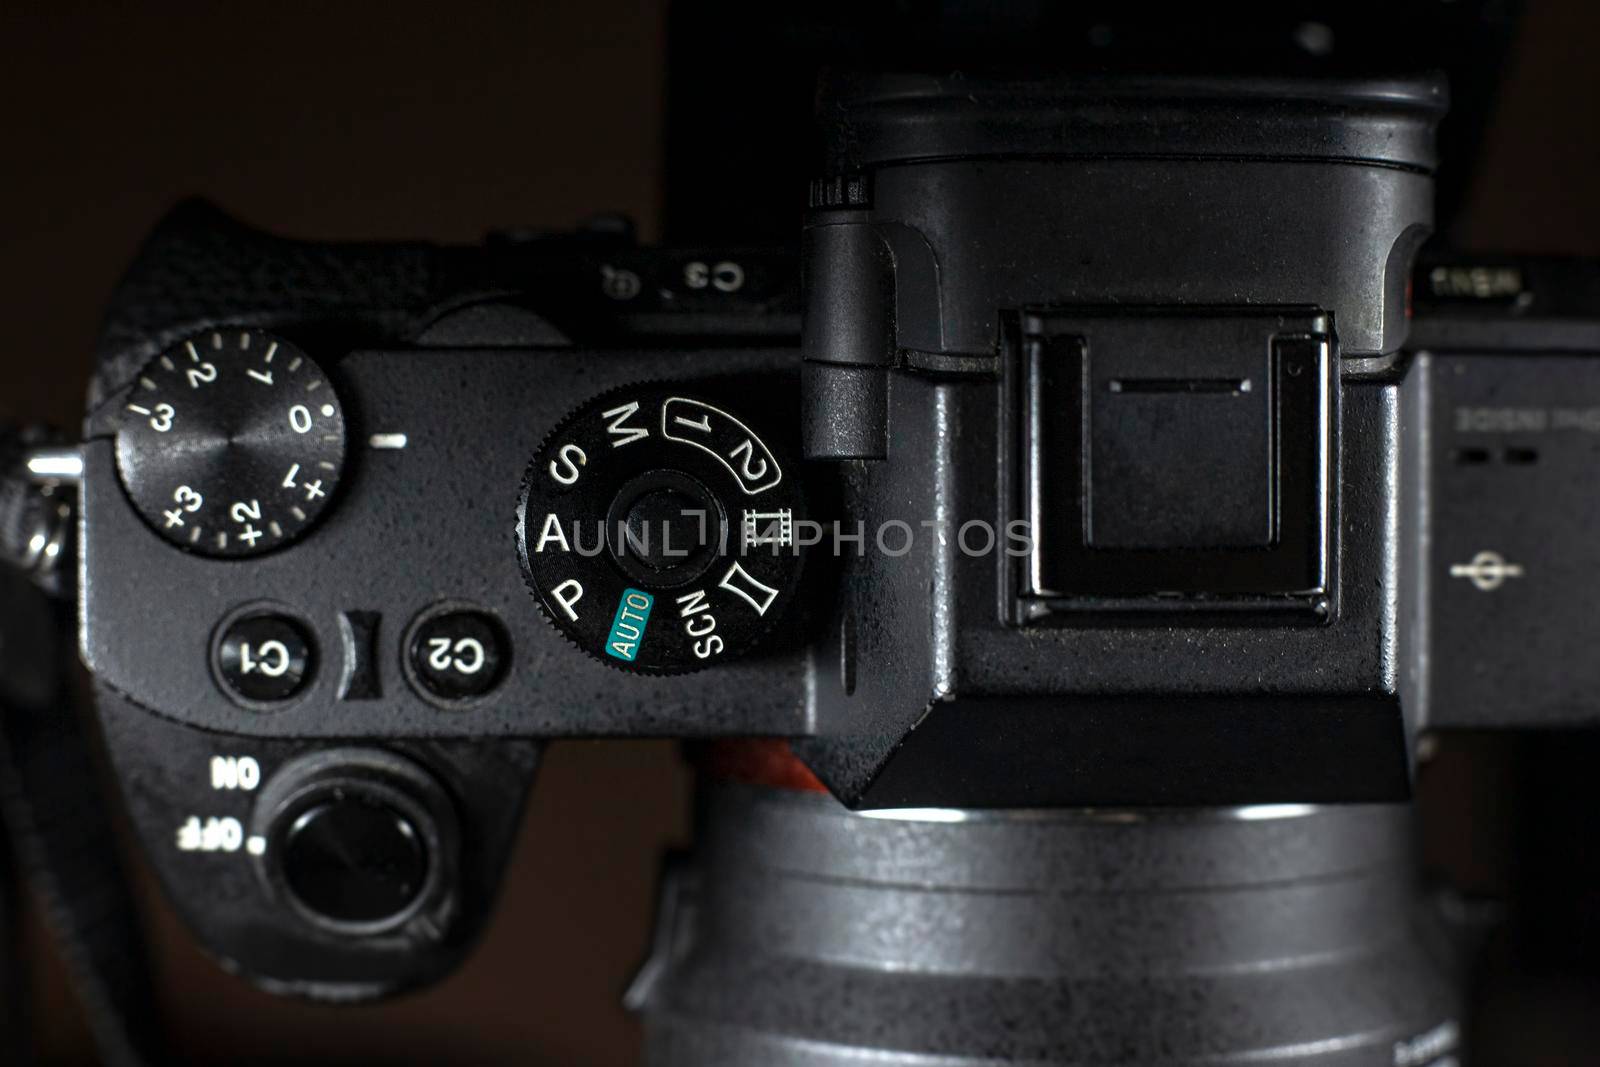 Shutter Speed dial of a digital camera in black background.